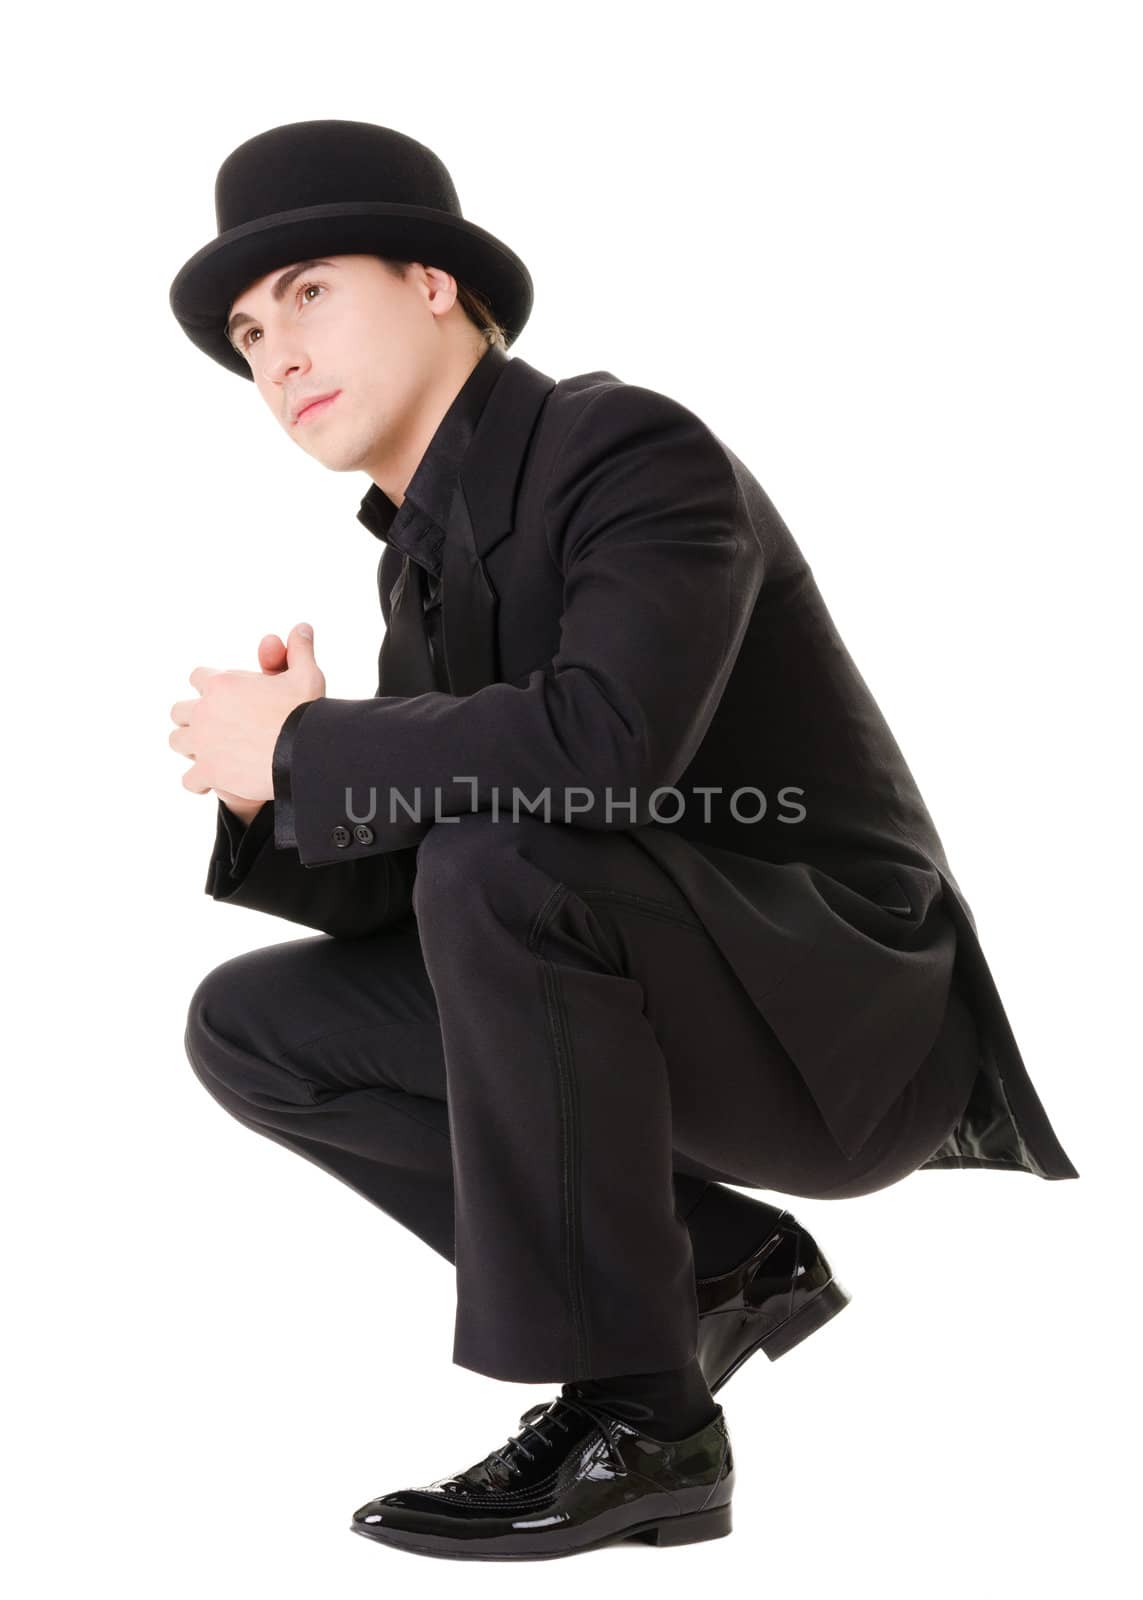 Handsome fashionable man in retro style with black suit and hat isolated on white background